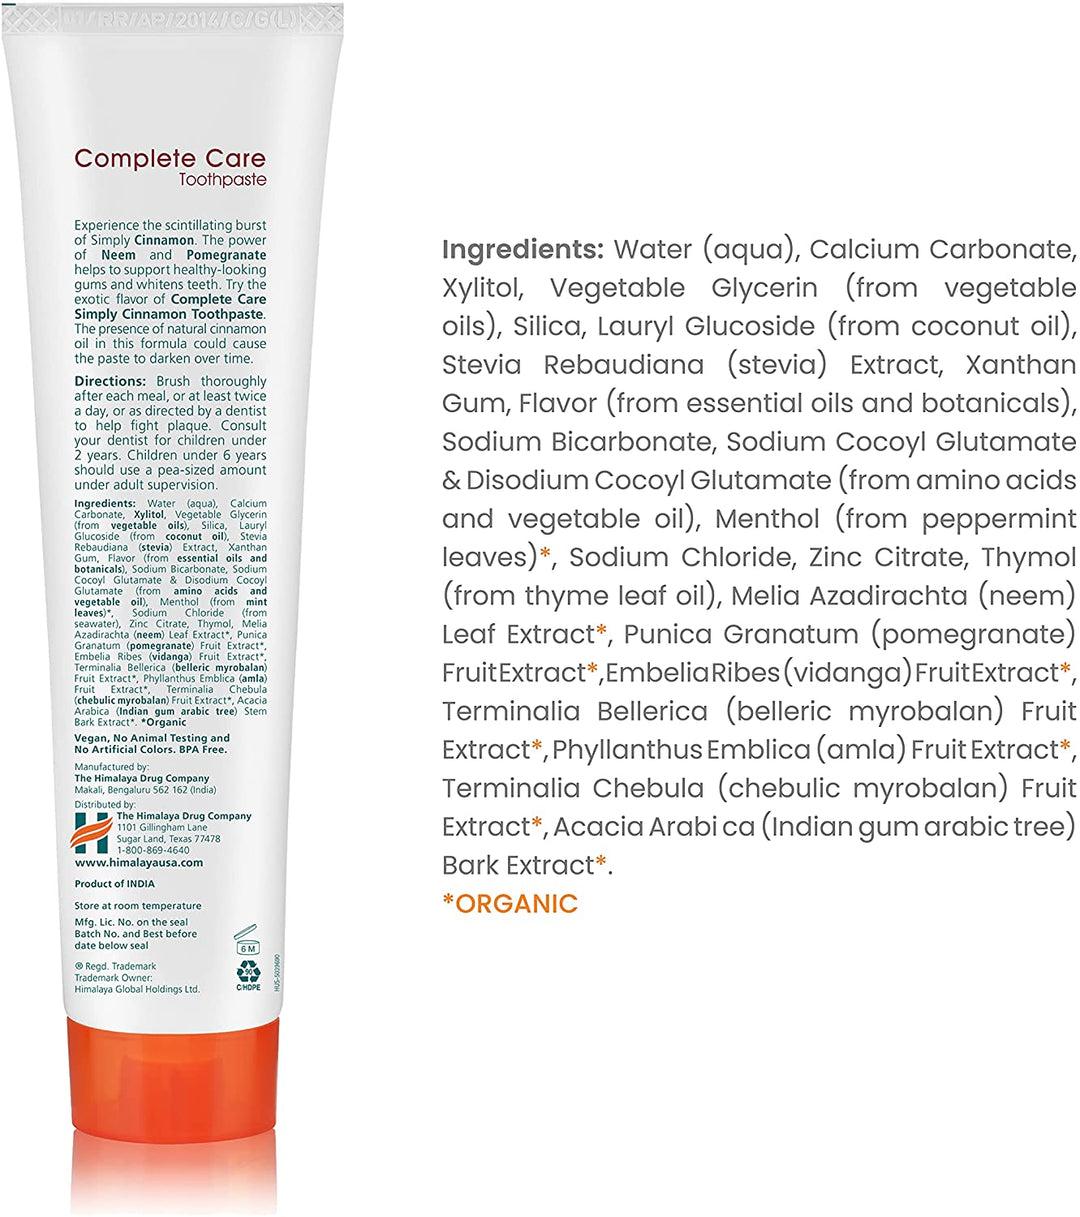 Himalaya BOTANIQUE Complete Care Toothpaste - Simply Cinnamon 150g Ingredients